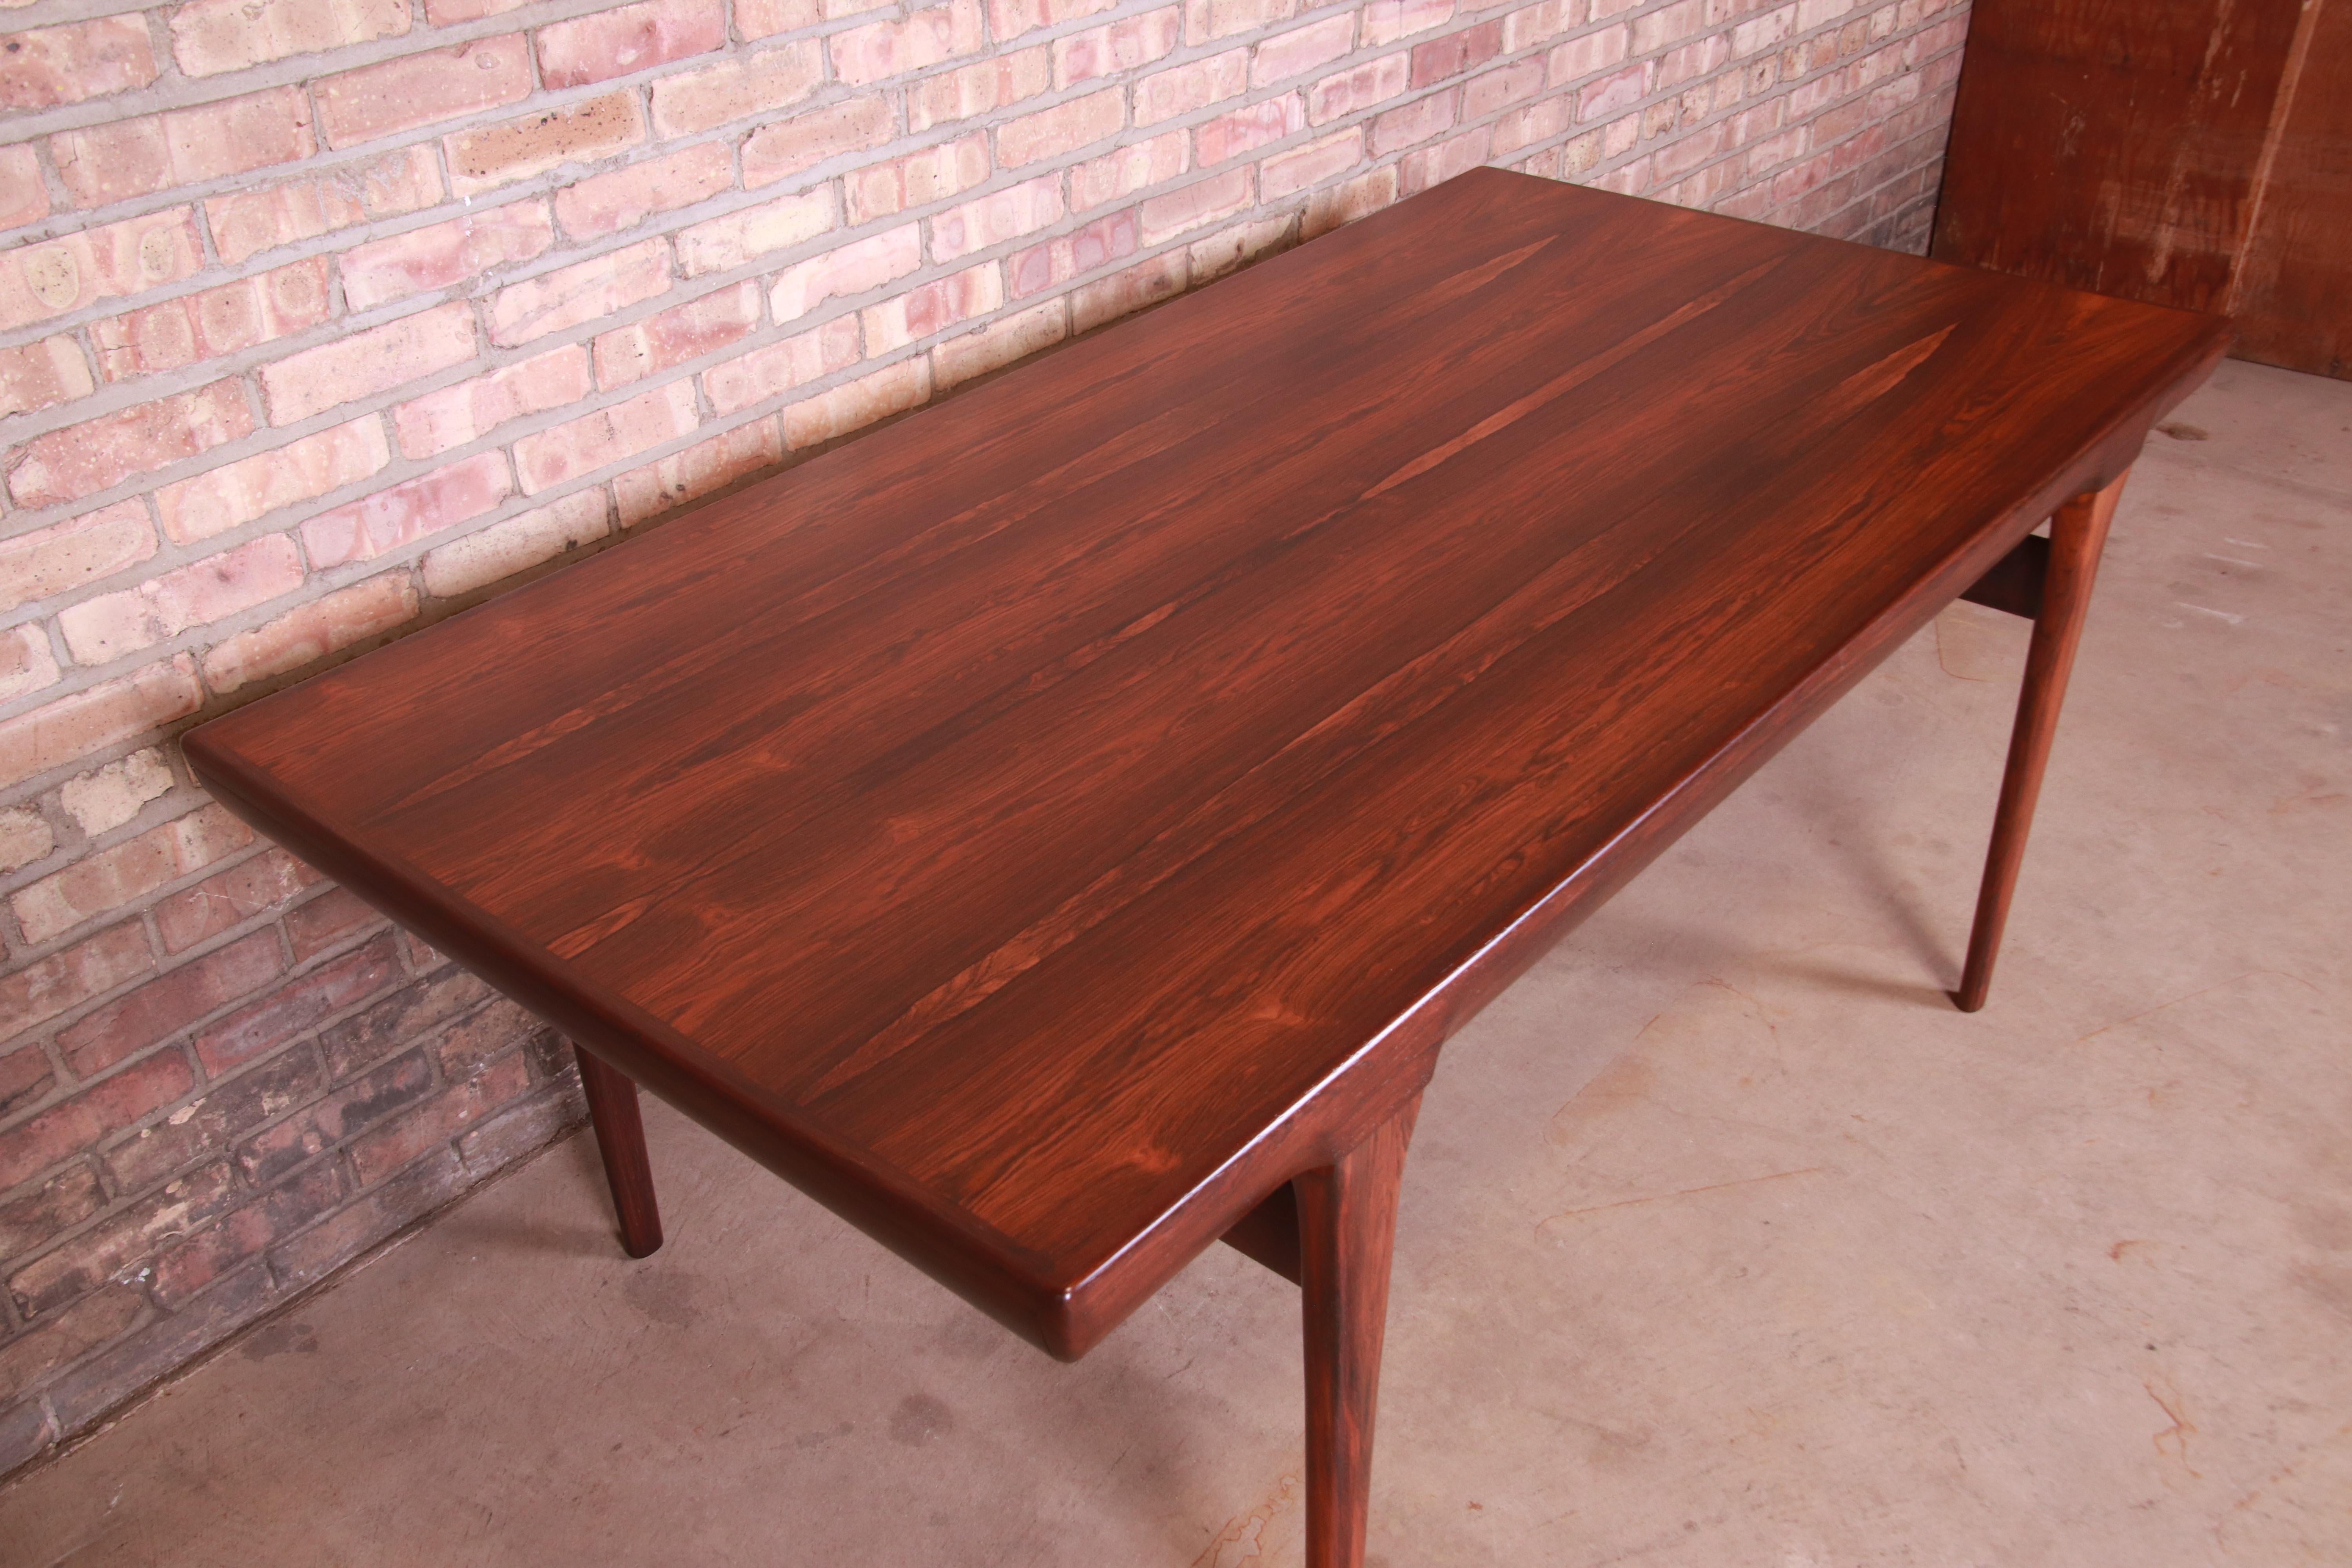 Ib Kofod-Larsen for Faarup Danish Modern Rosewood Dining Table, Newly Refinished For Sale 3